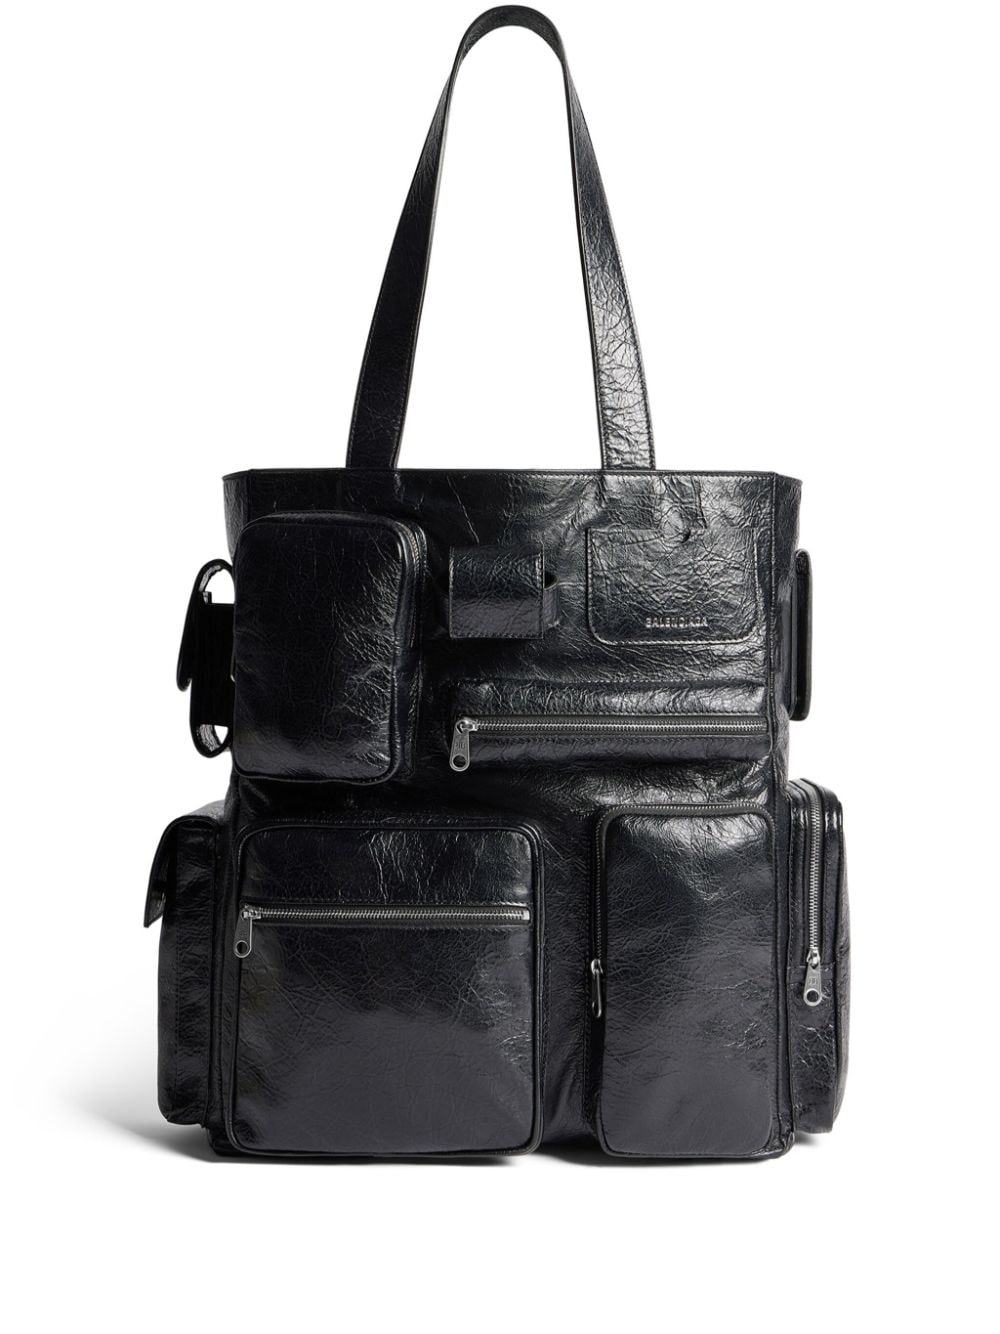 Superbusy leather tote bag